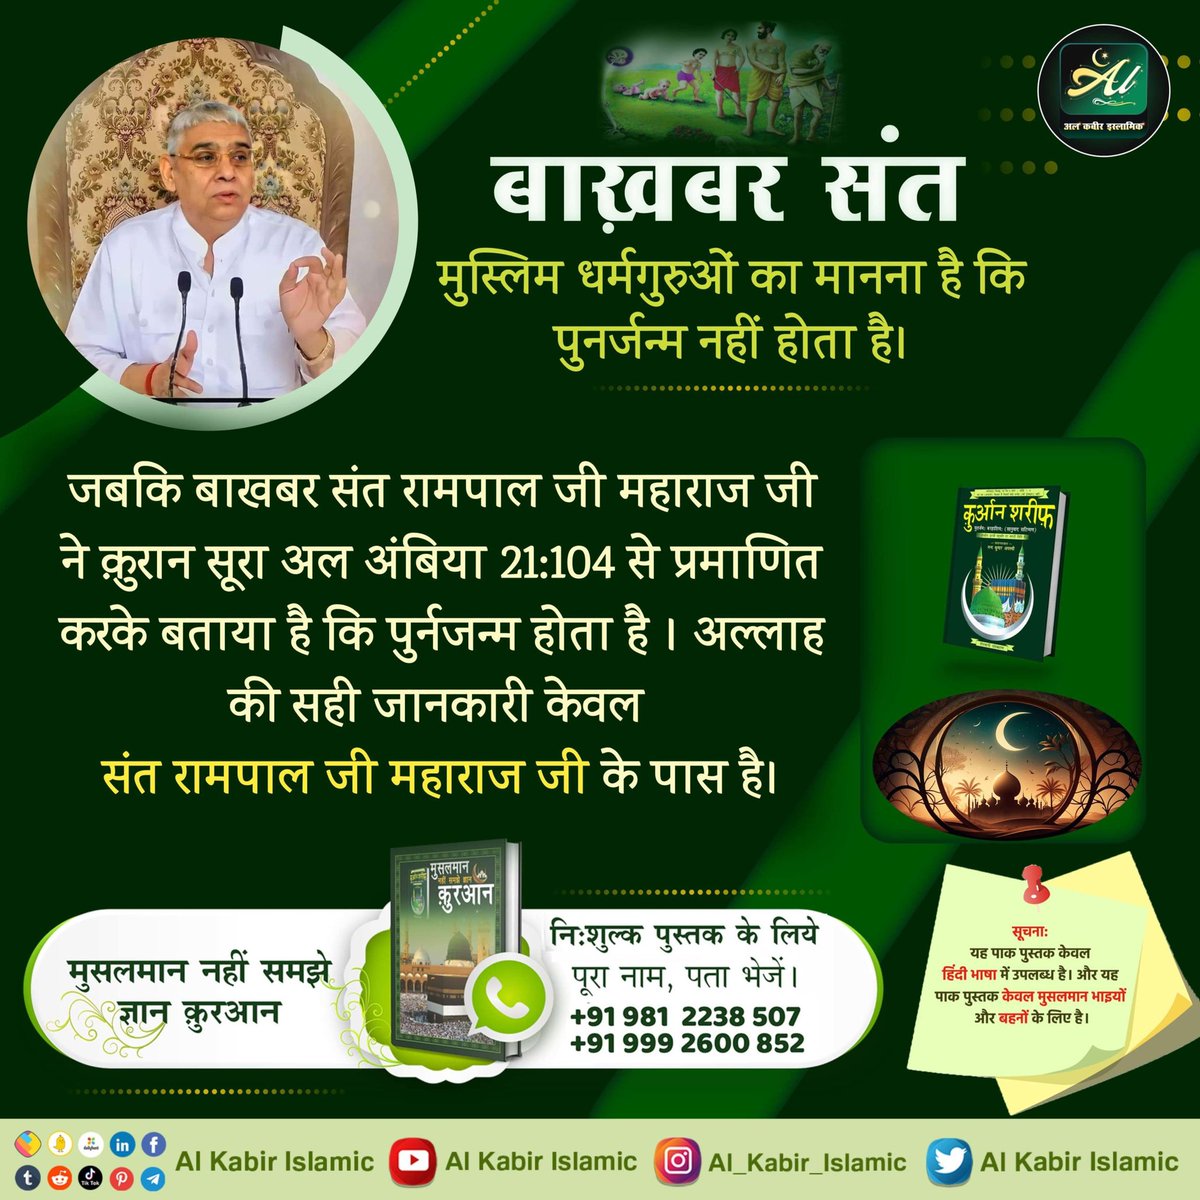 #कादर_अल्लाह_कबीर Muslim religious leaders believe that there is no rebirth. Whereas Baakhabar Sant Rampal Ji Maharaj has proved from Quran Sura Al-Anbiya 21:104 that rebirth takes place, only Sant Rampal Ji has the correct information about Allah. #GodMorningSaturday